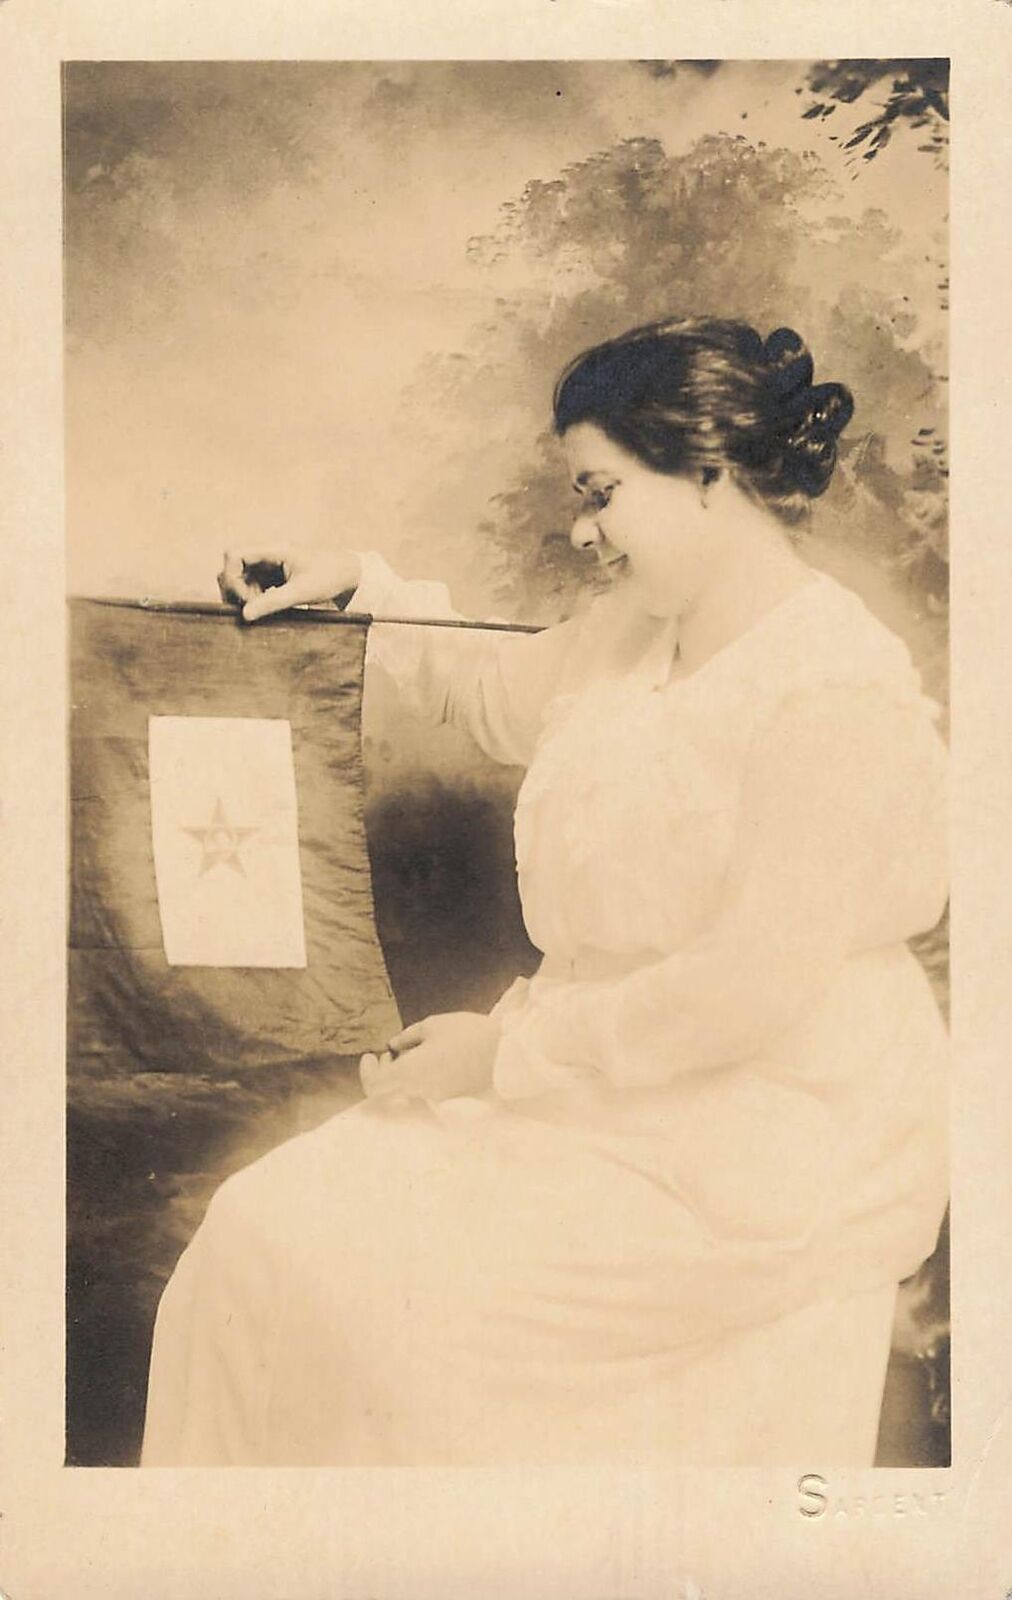 1918 RPCC 4th Liberty Loan Parade Woman Holding Patriotic Mourning Flag Father